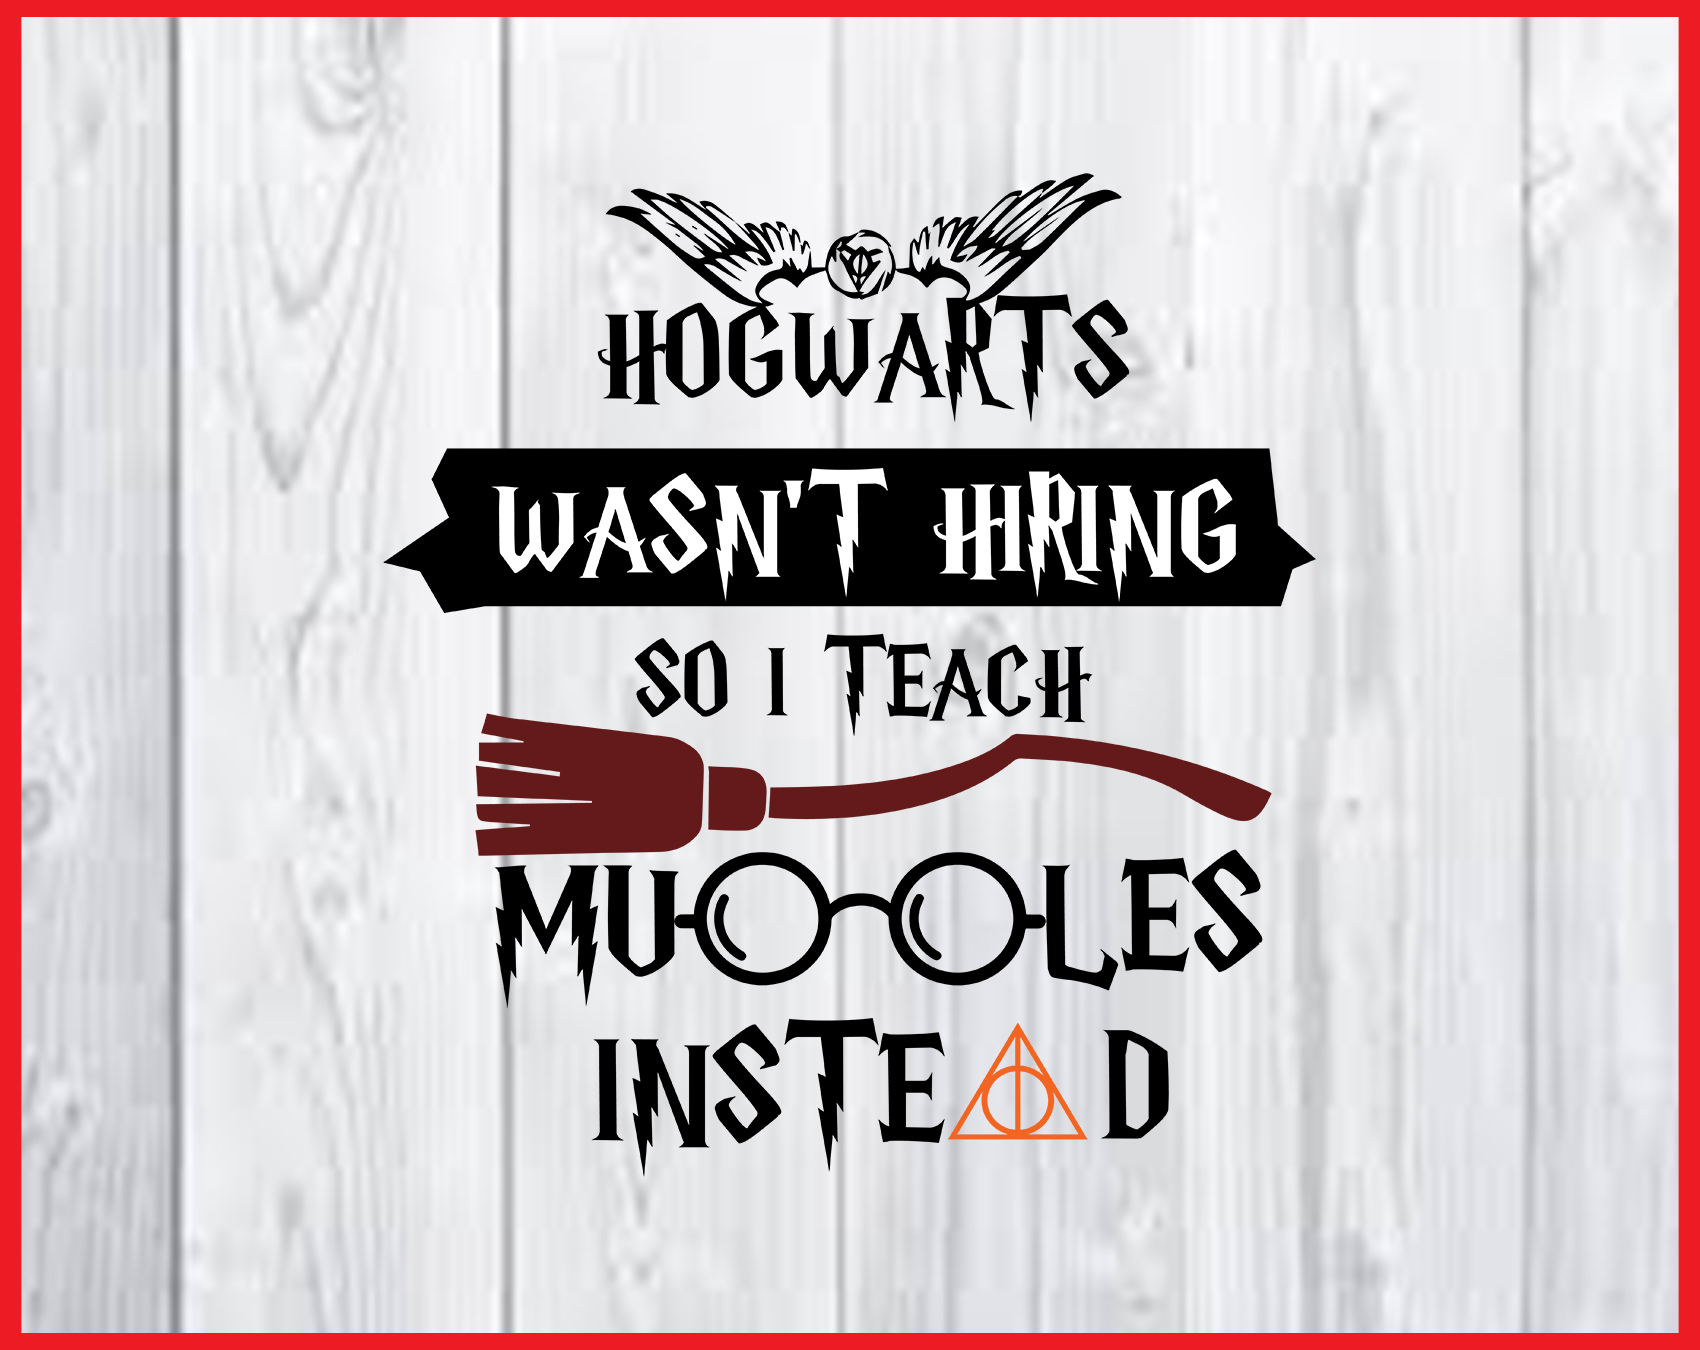 Download Hogwarts Wasnt Hiring So I Teach Muggles Instead Svg Harry Potter Svg Png Dxf Harry Potter Silhouette Cricut Customer Satisfaction Is Our Priority